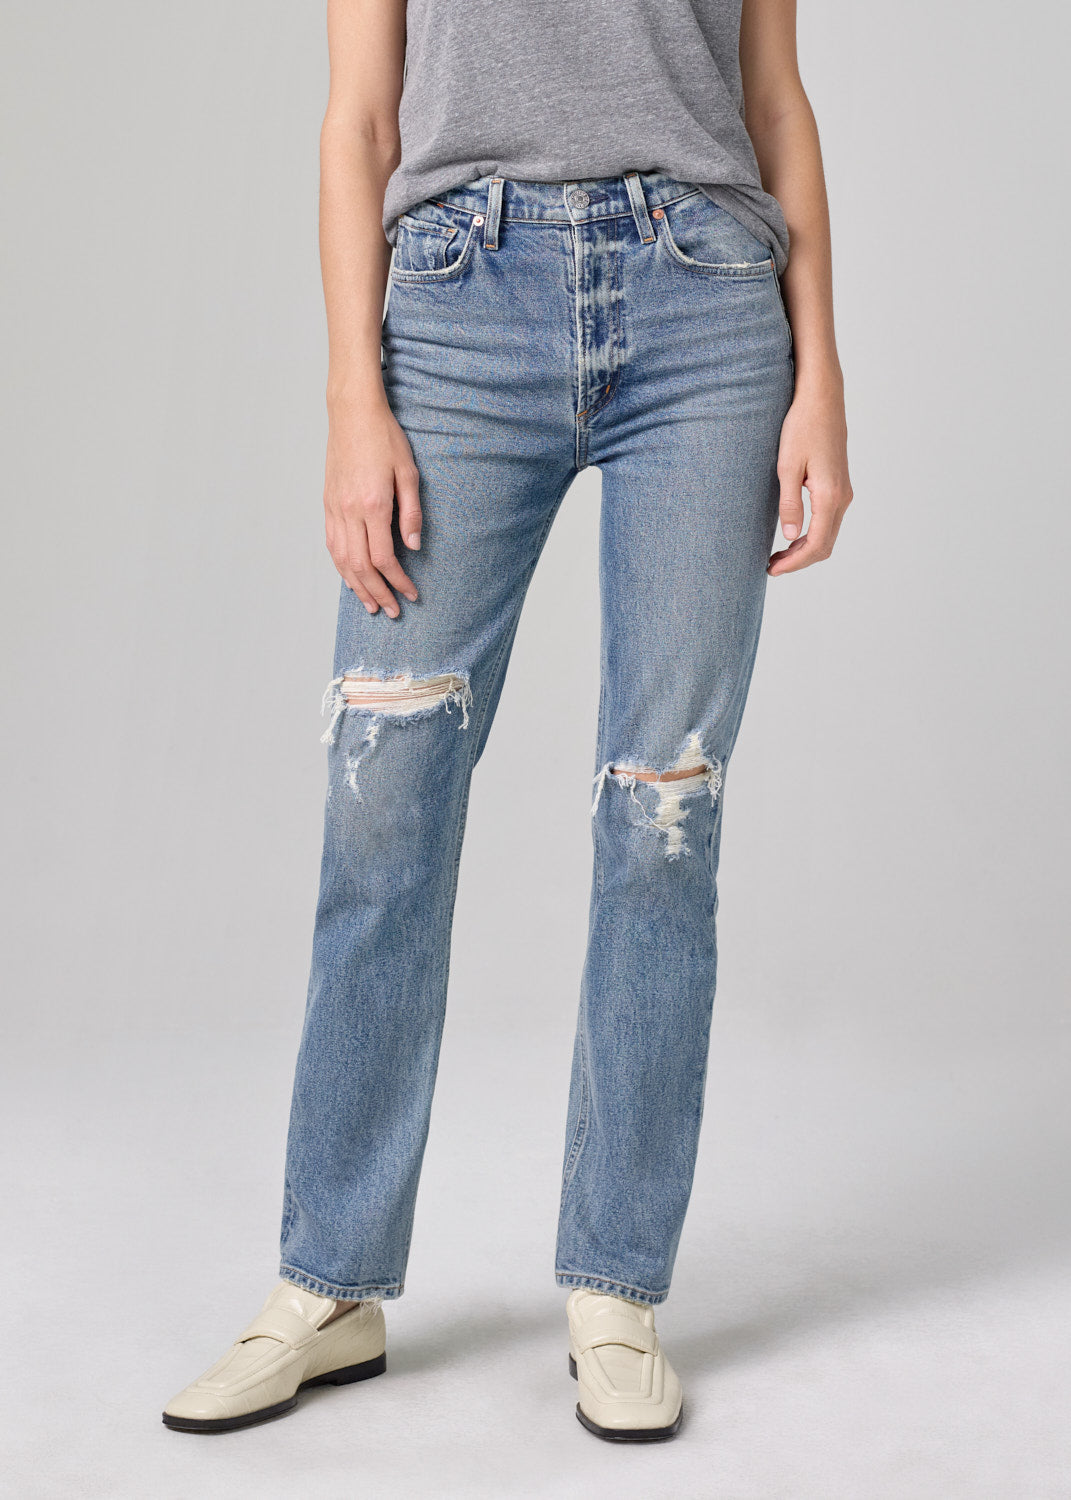 DAPHNE HIGH RISE STOVEPIPE JEAN IN ROSECLIFF